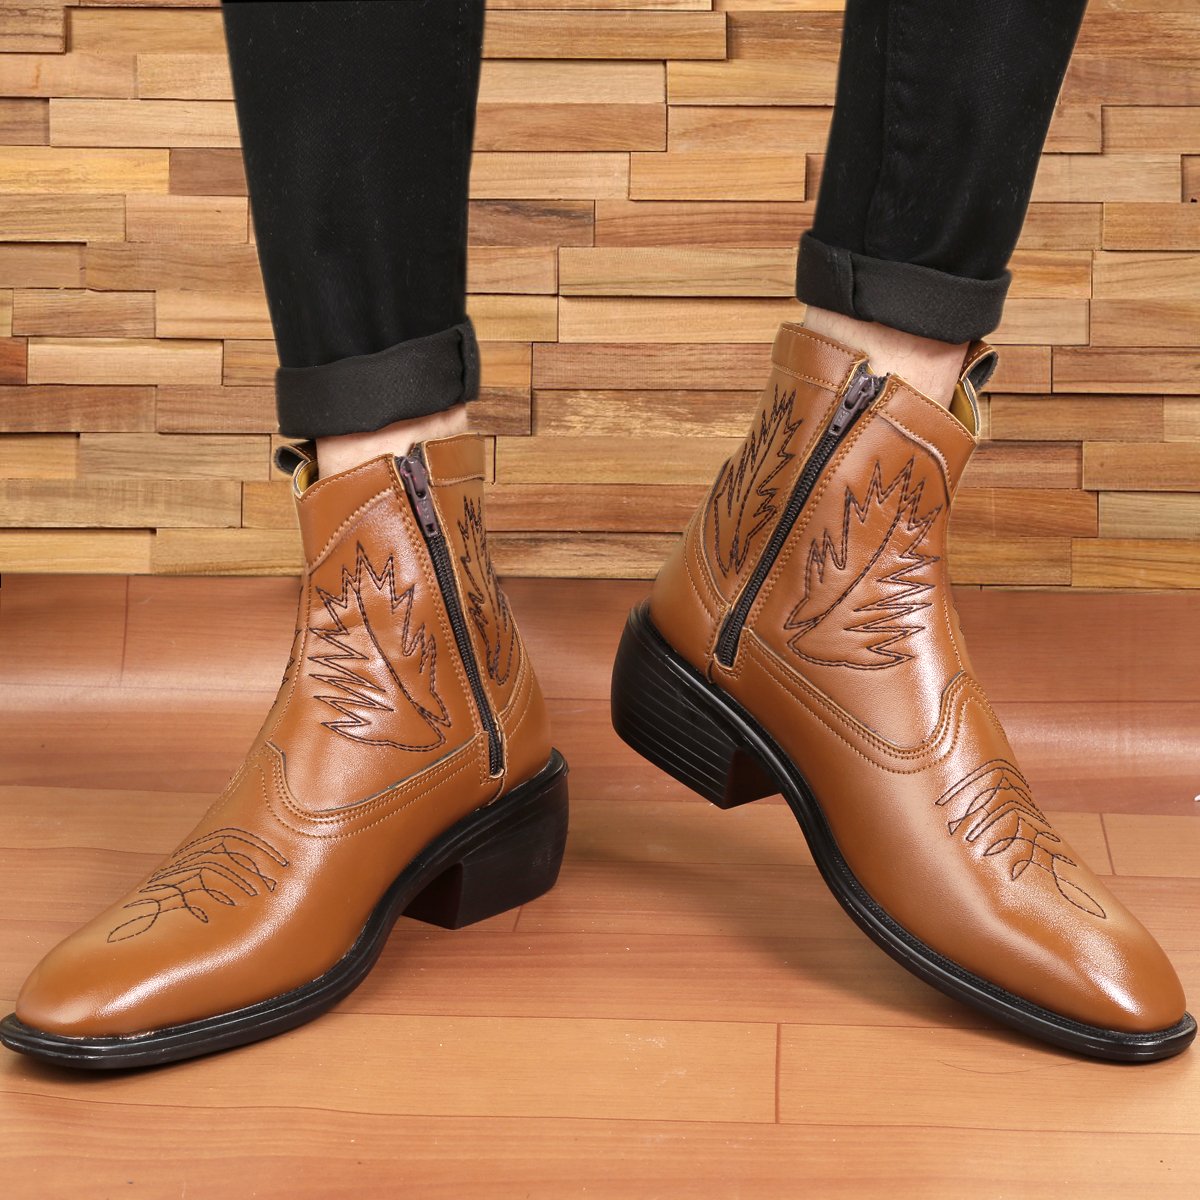 Jack Marc Men's Formal and Casual Retro Tan Boots for all seasons